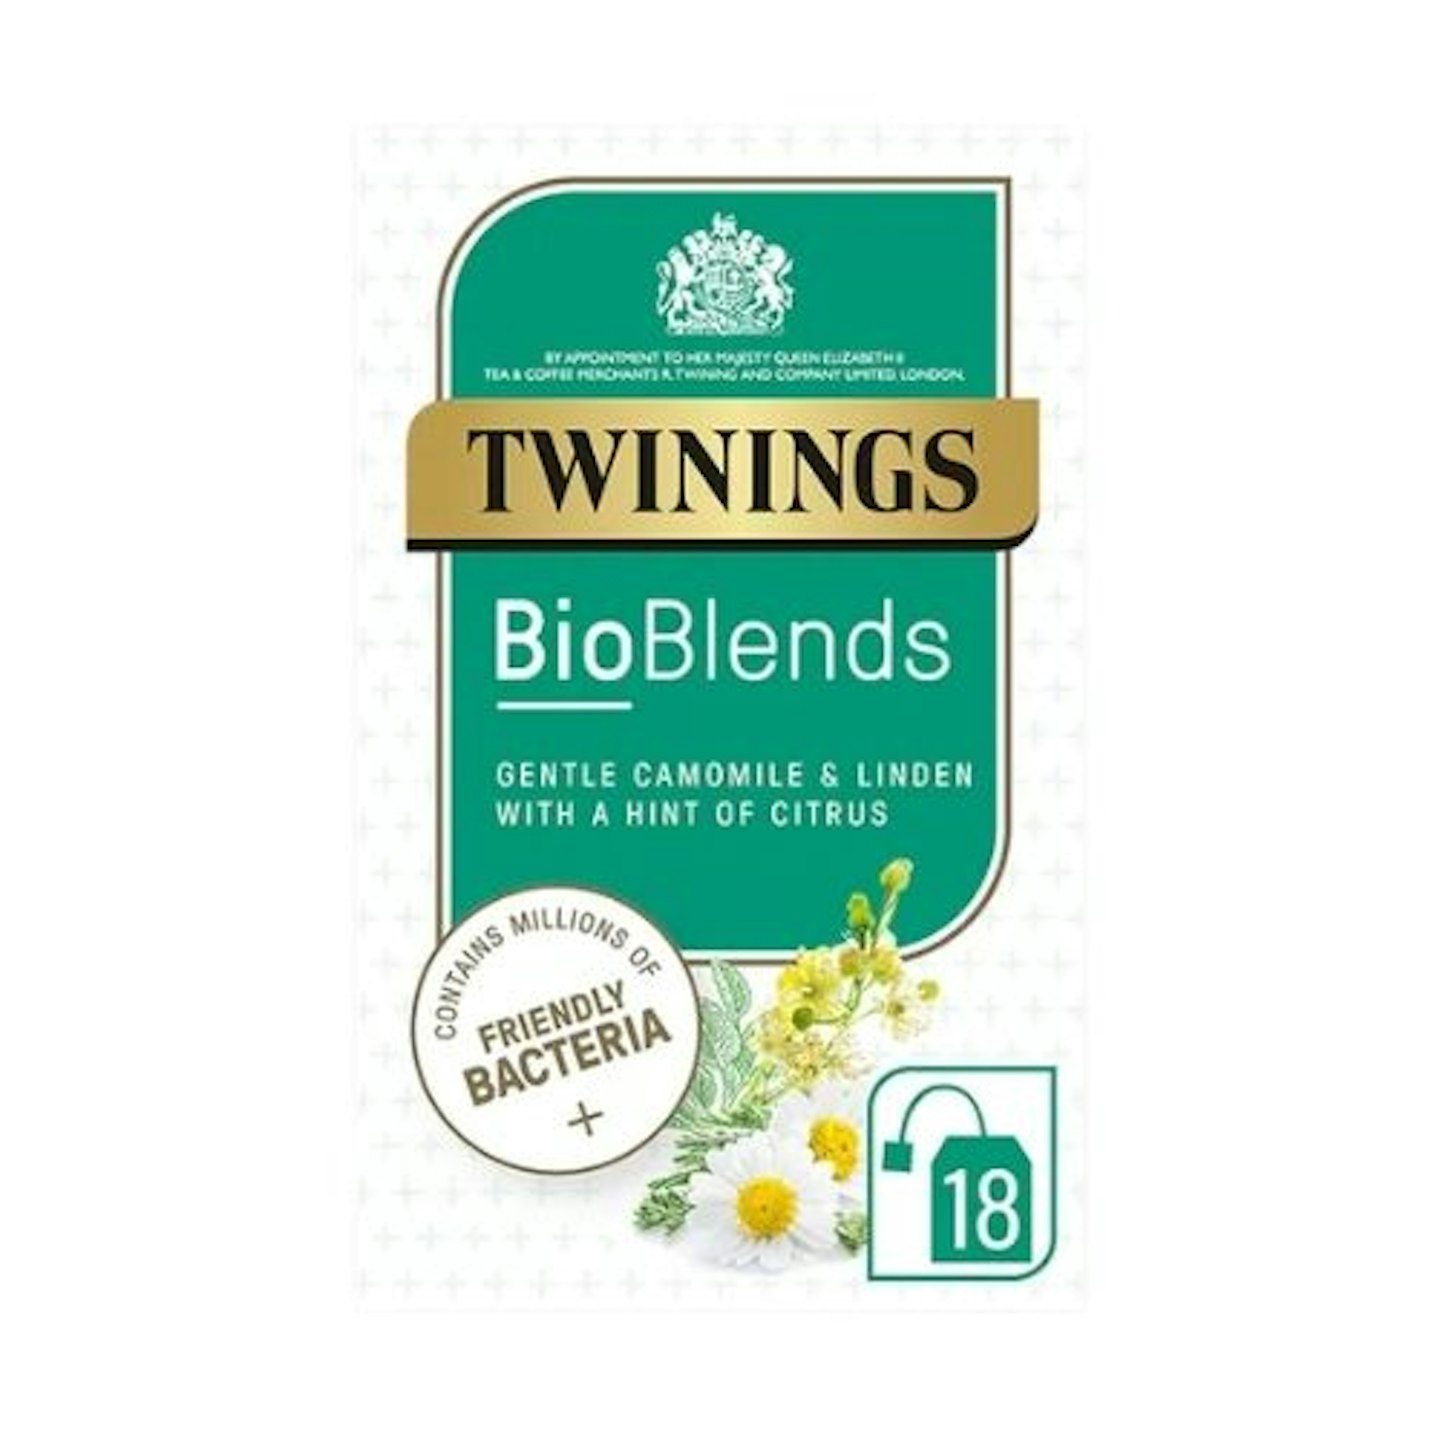 Twinings Bioblends Chamomile & Linden Tea